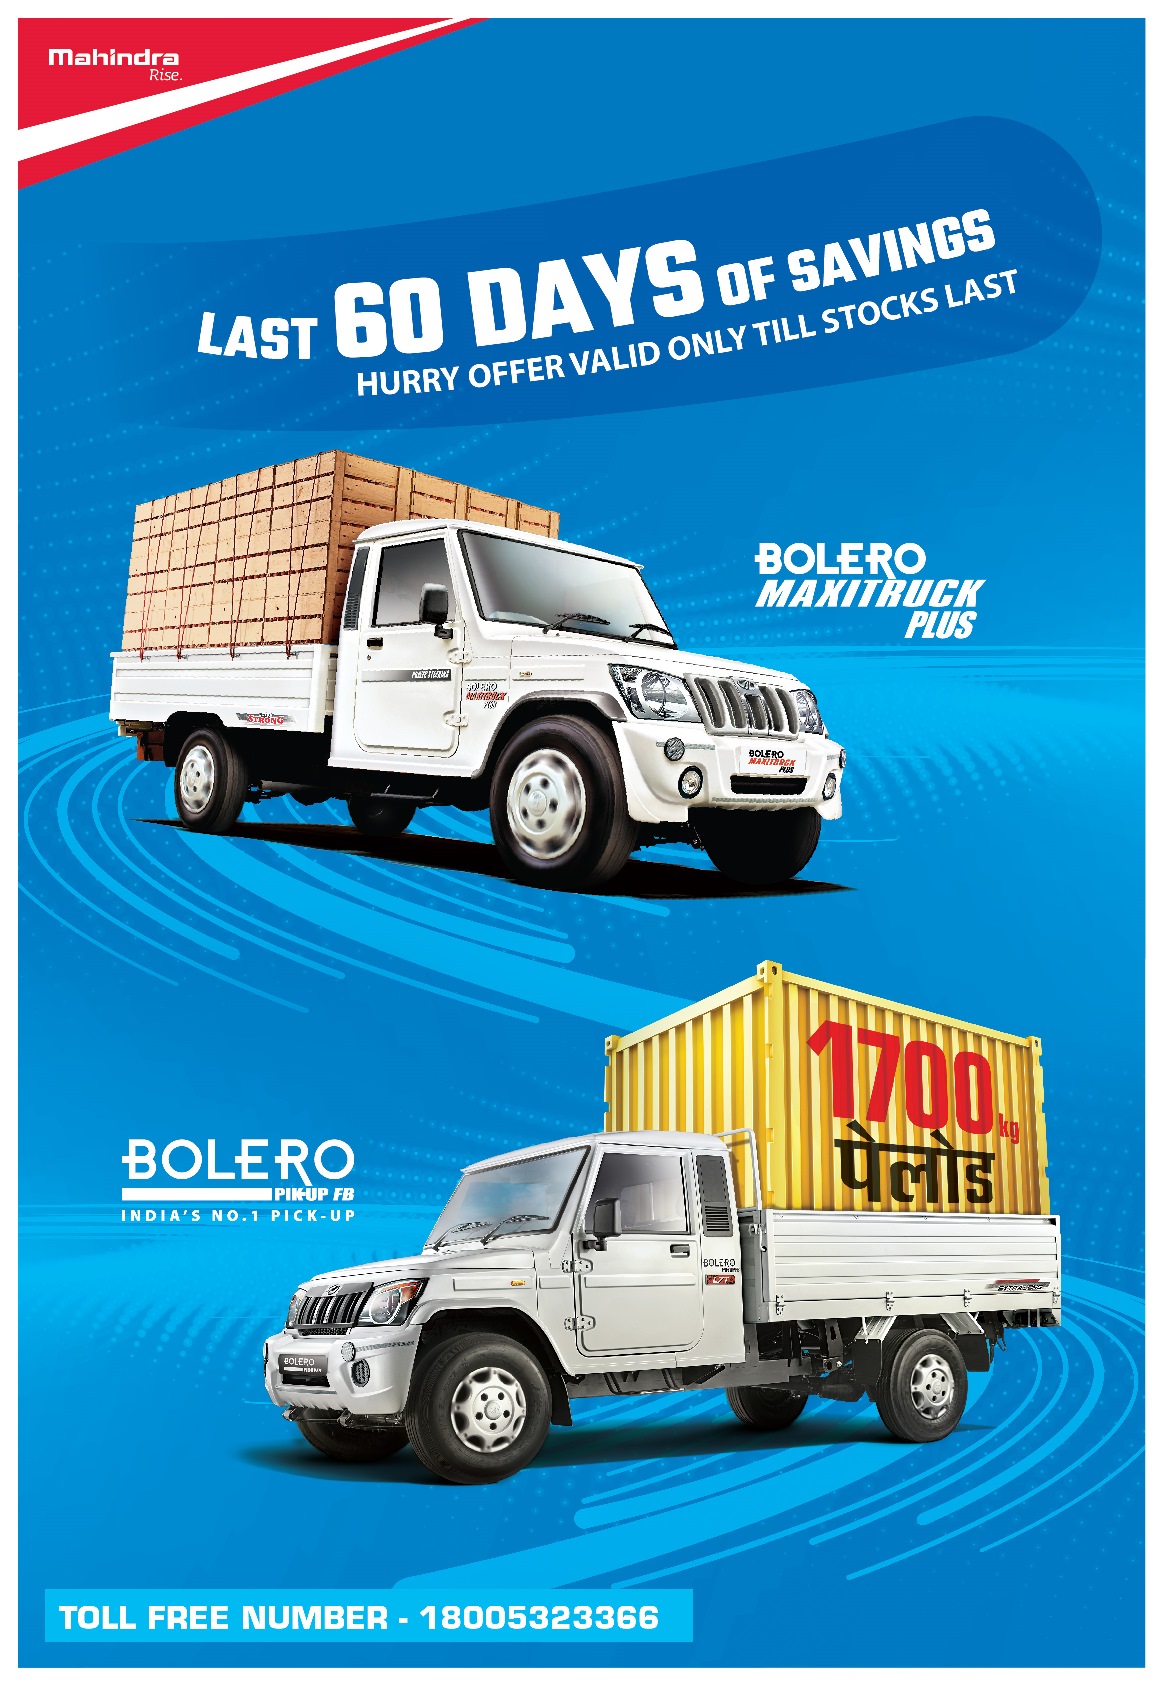 mahindra-introduces-bachat-ke-antim-60-din-offer-on-its-bsiv-small-commercial-vehicles